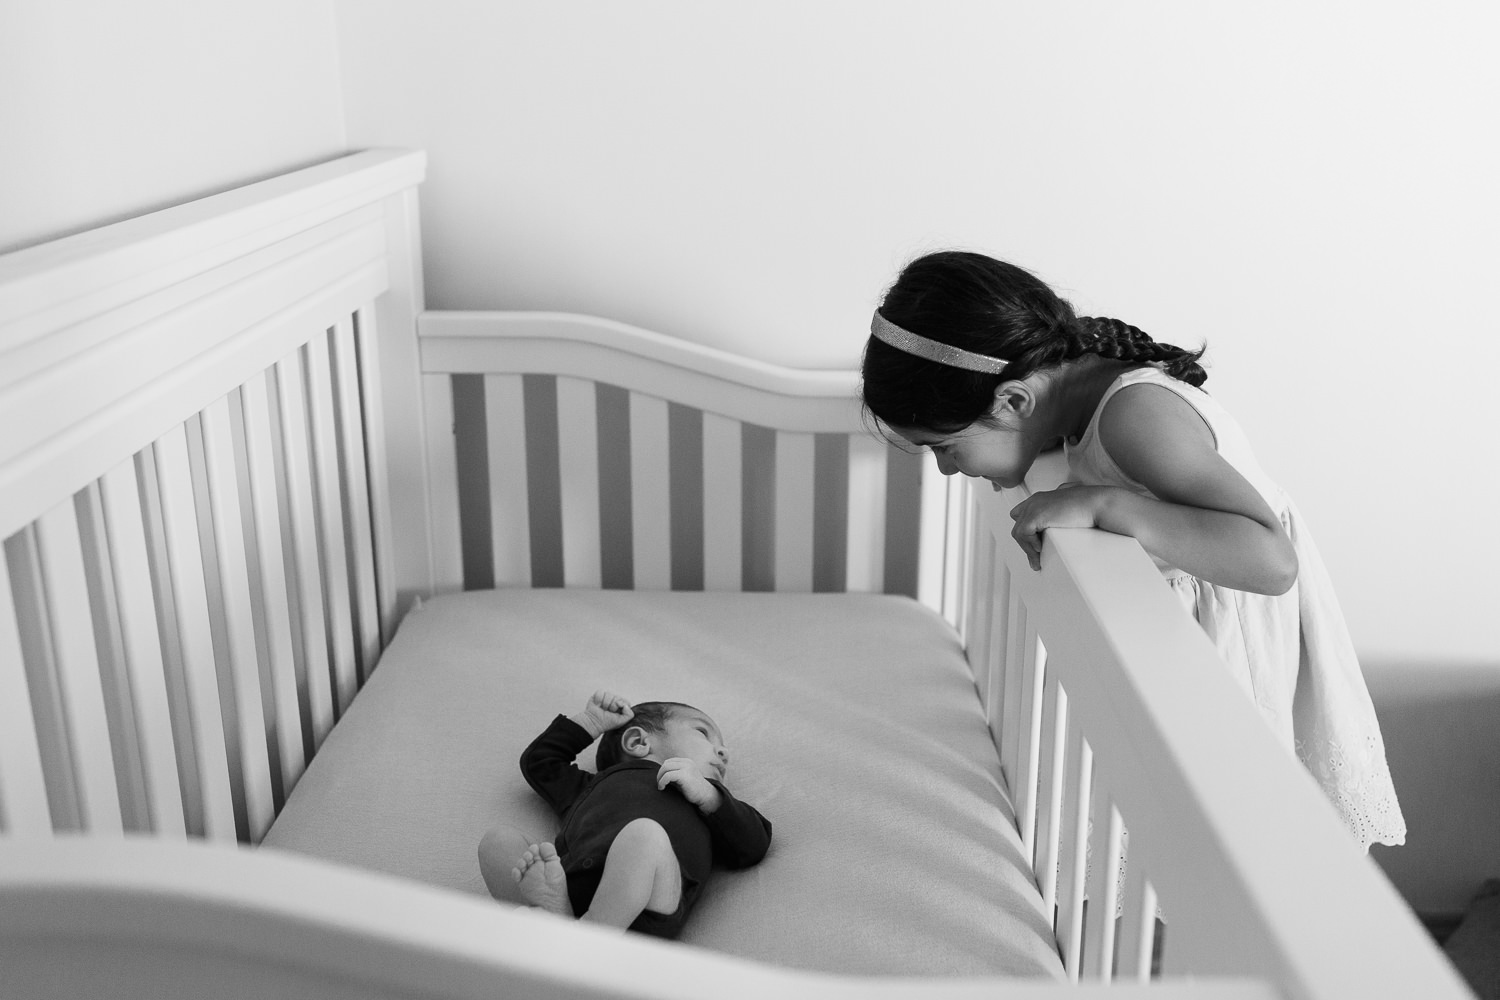 4 year old toddler girl with dark hair in braids peeking over to see 2 week old baby brother lying in crib in nursery - GTA Lifestyle Photos